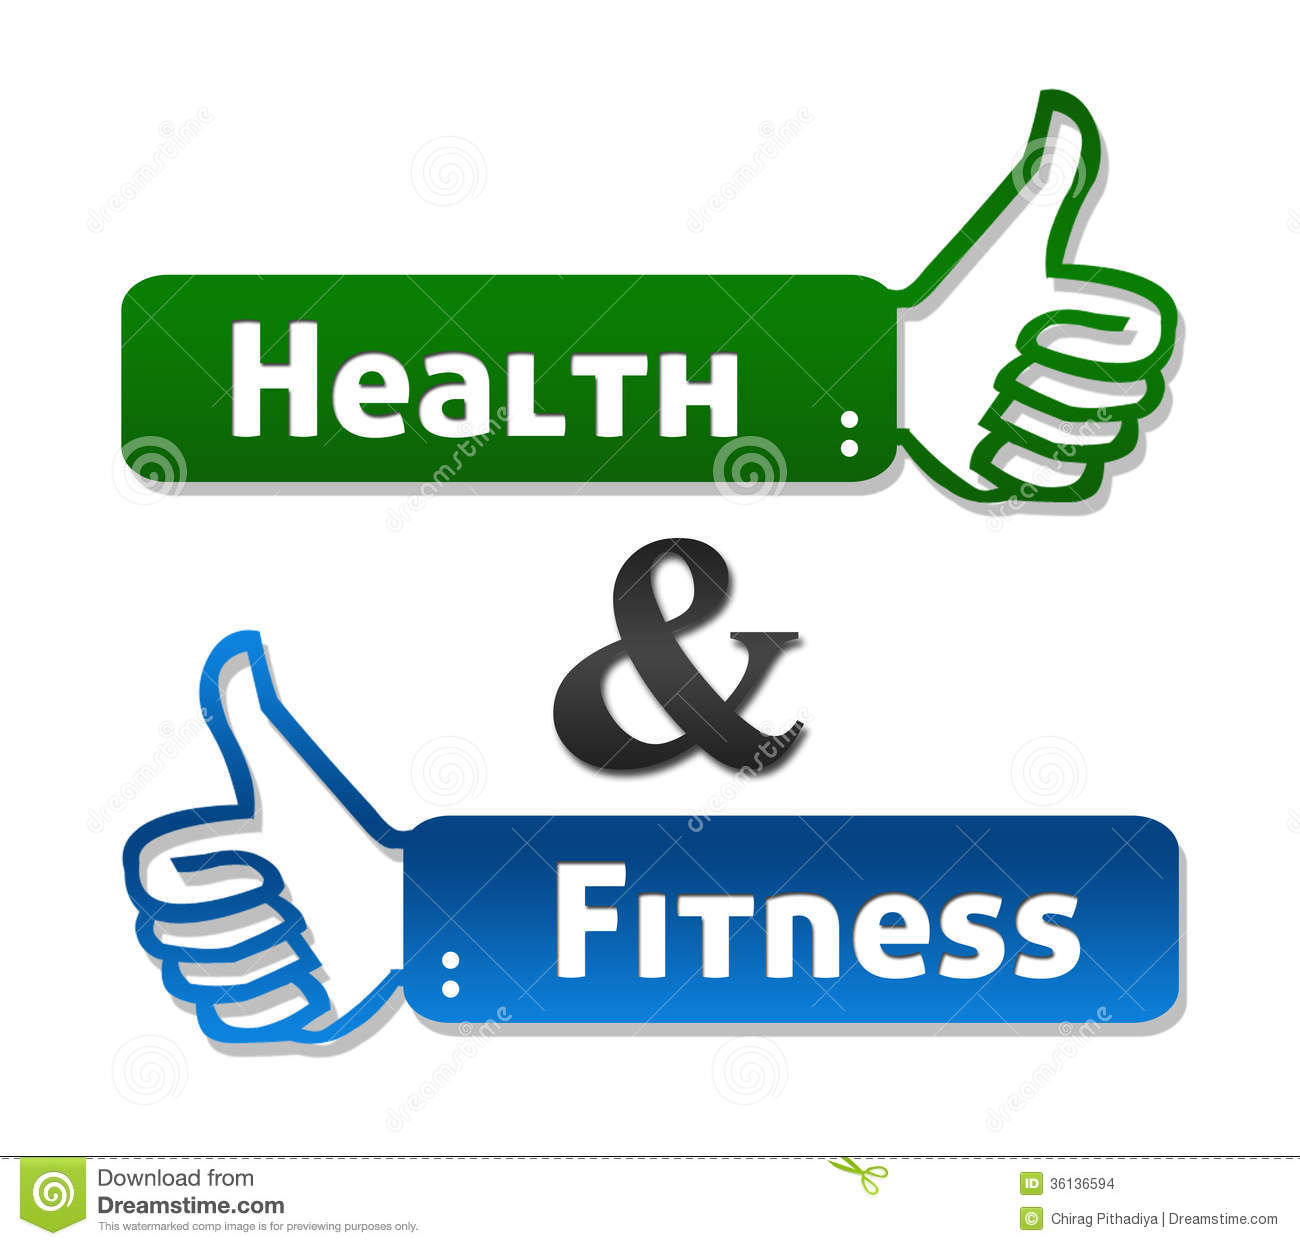 Health And Fitness Thumb Up Stock Images   Image  36136594